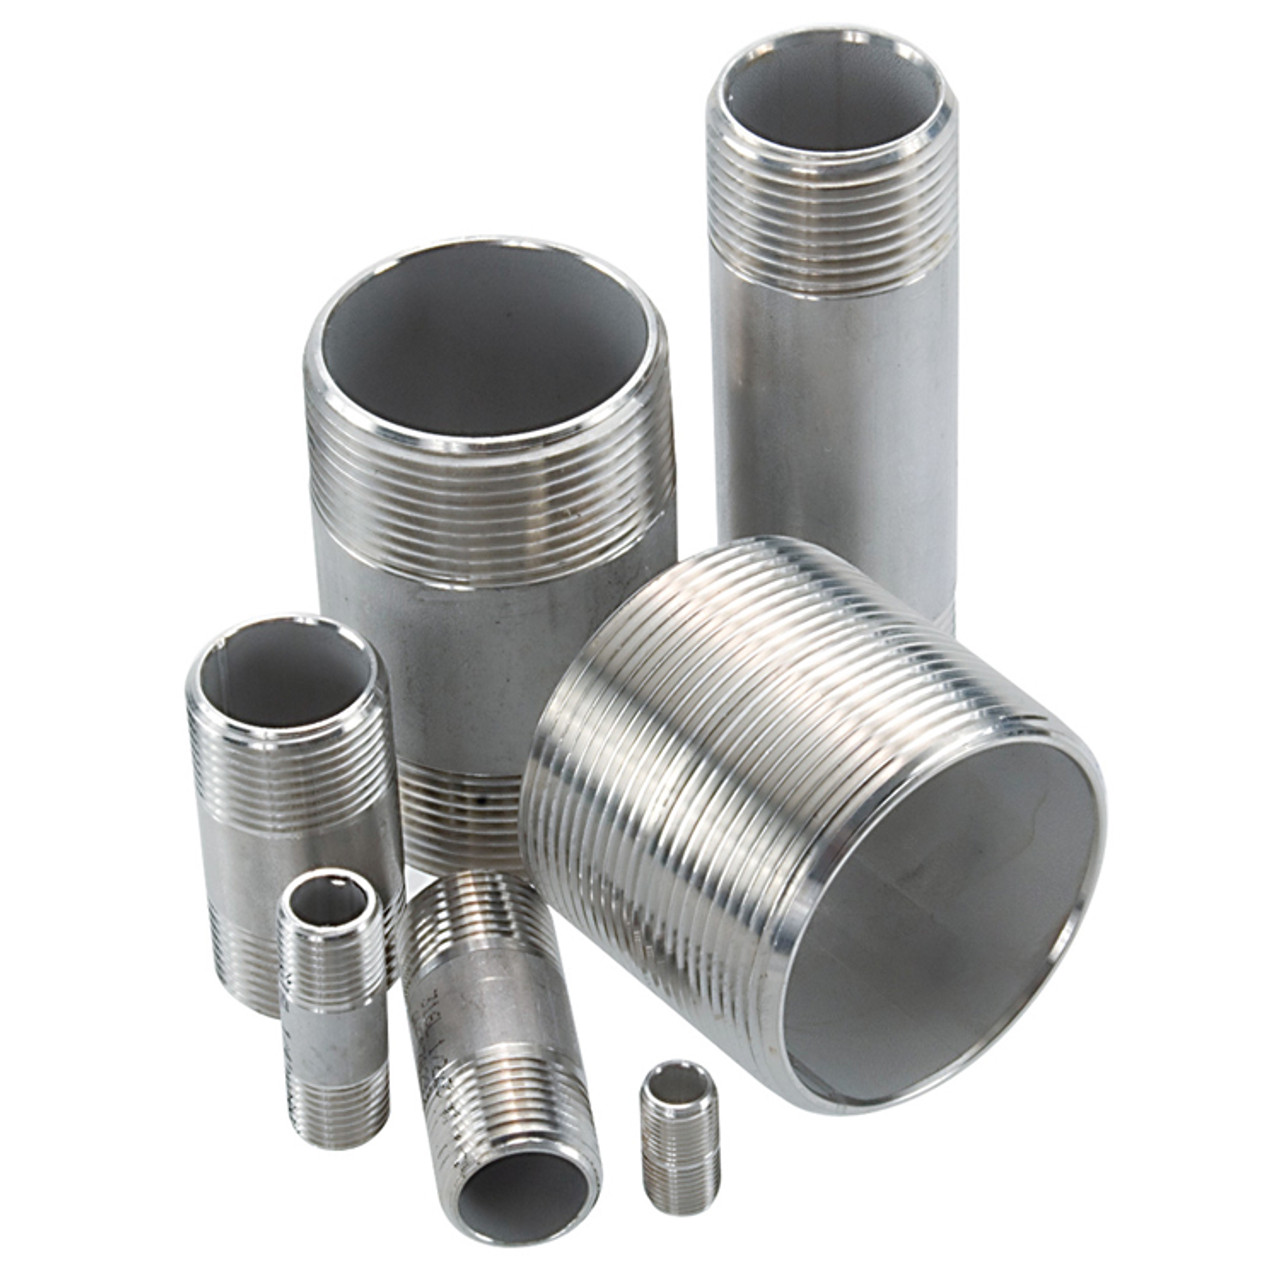 1/4 x 4" Stainless Steel 316 Male NPT Pipe Nipple  G1616SS-025X4